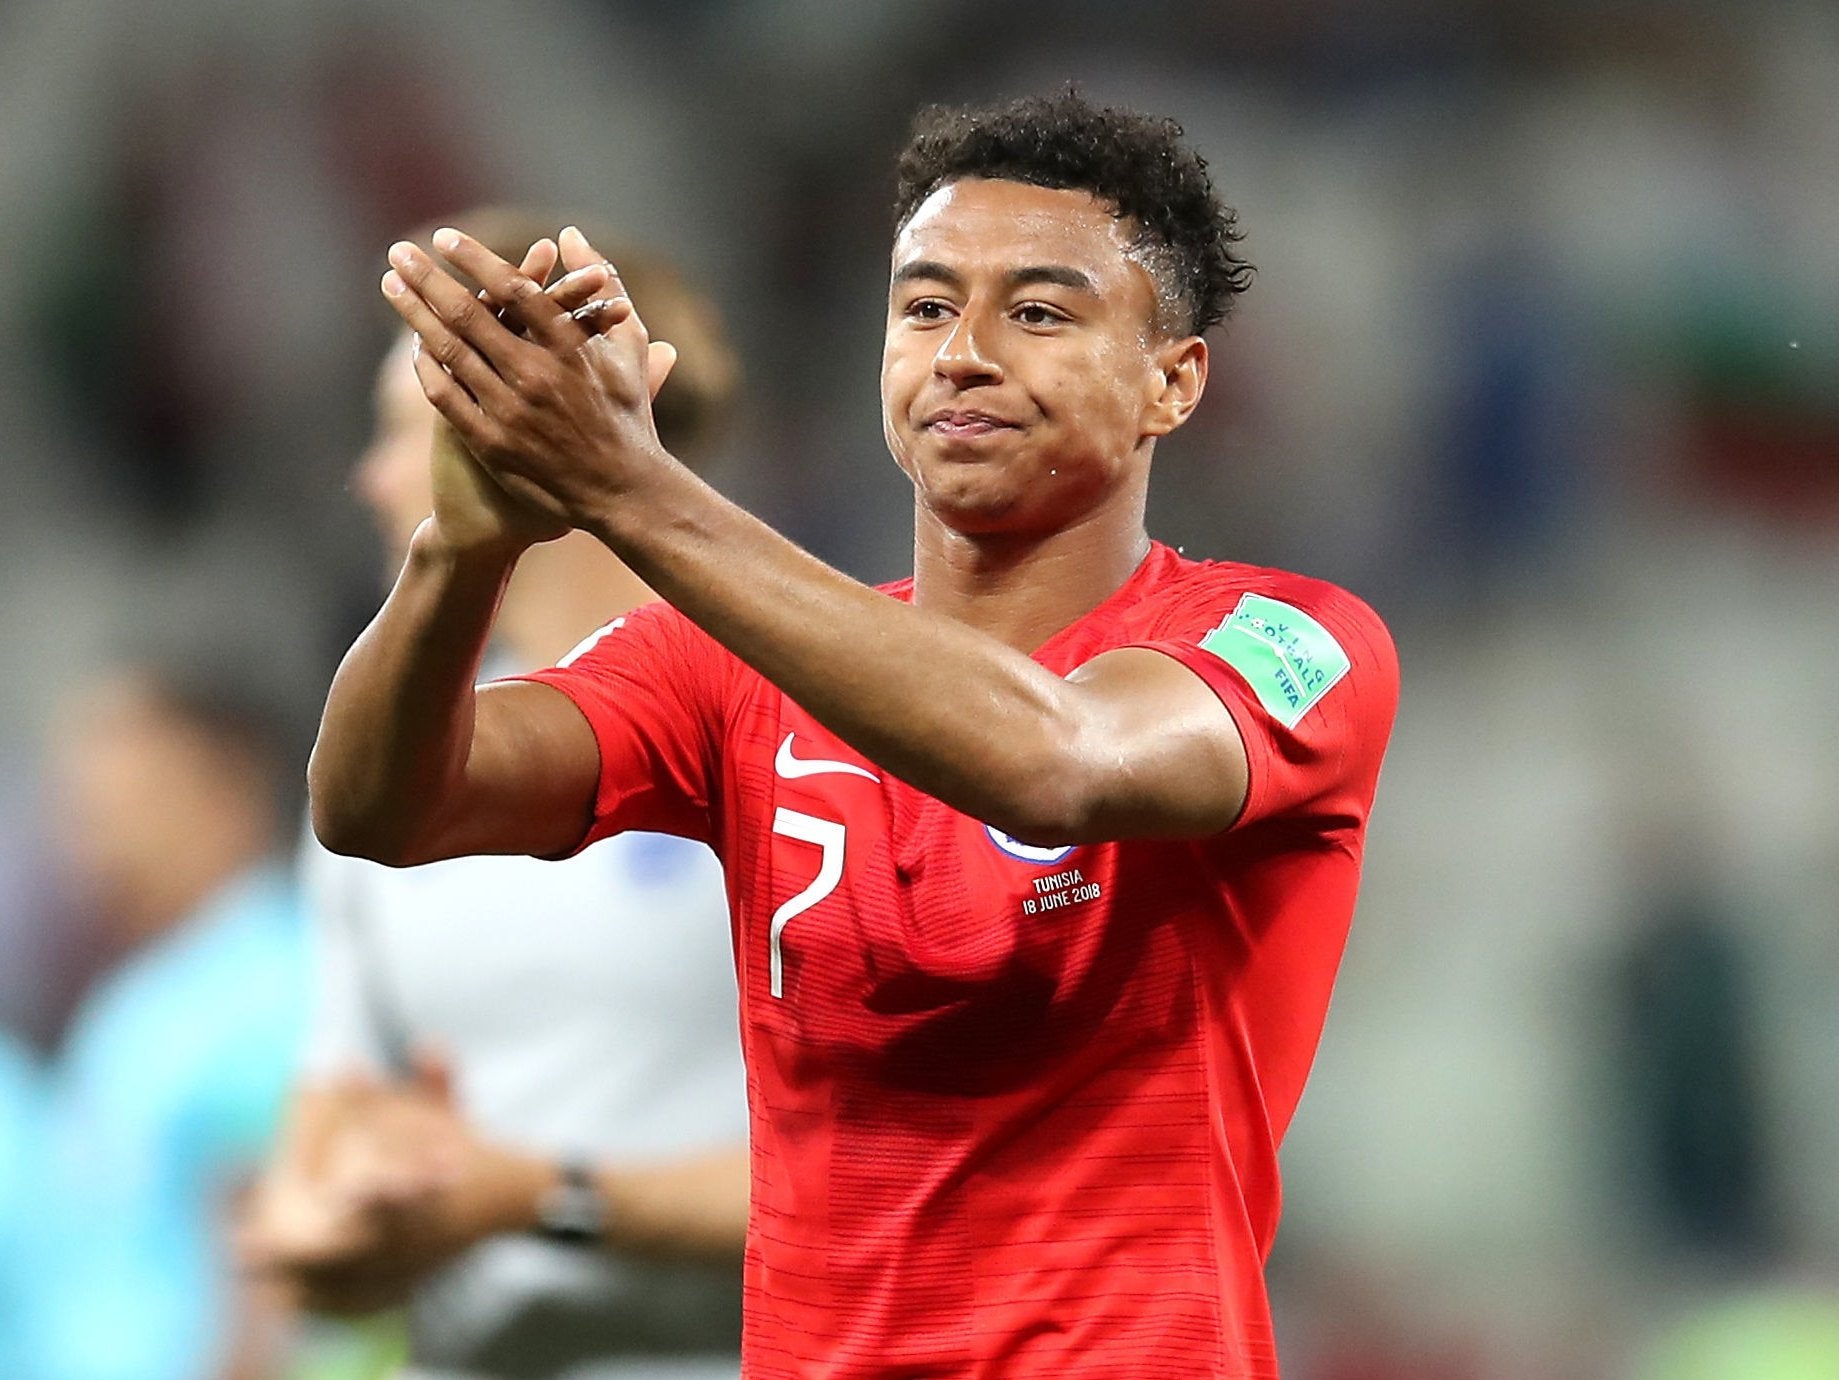 England's Jesse Lingard acknowledges fans after the final whistle